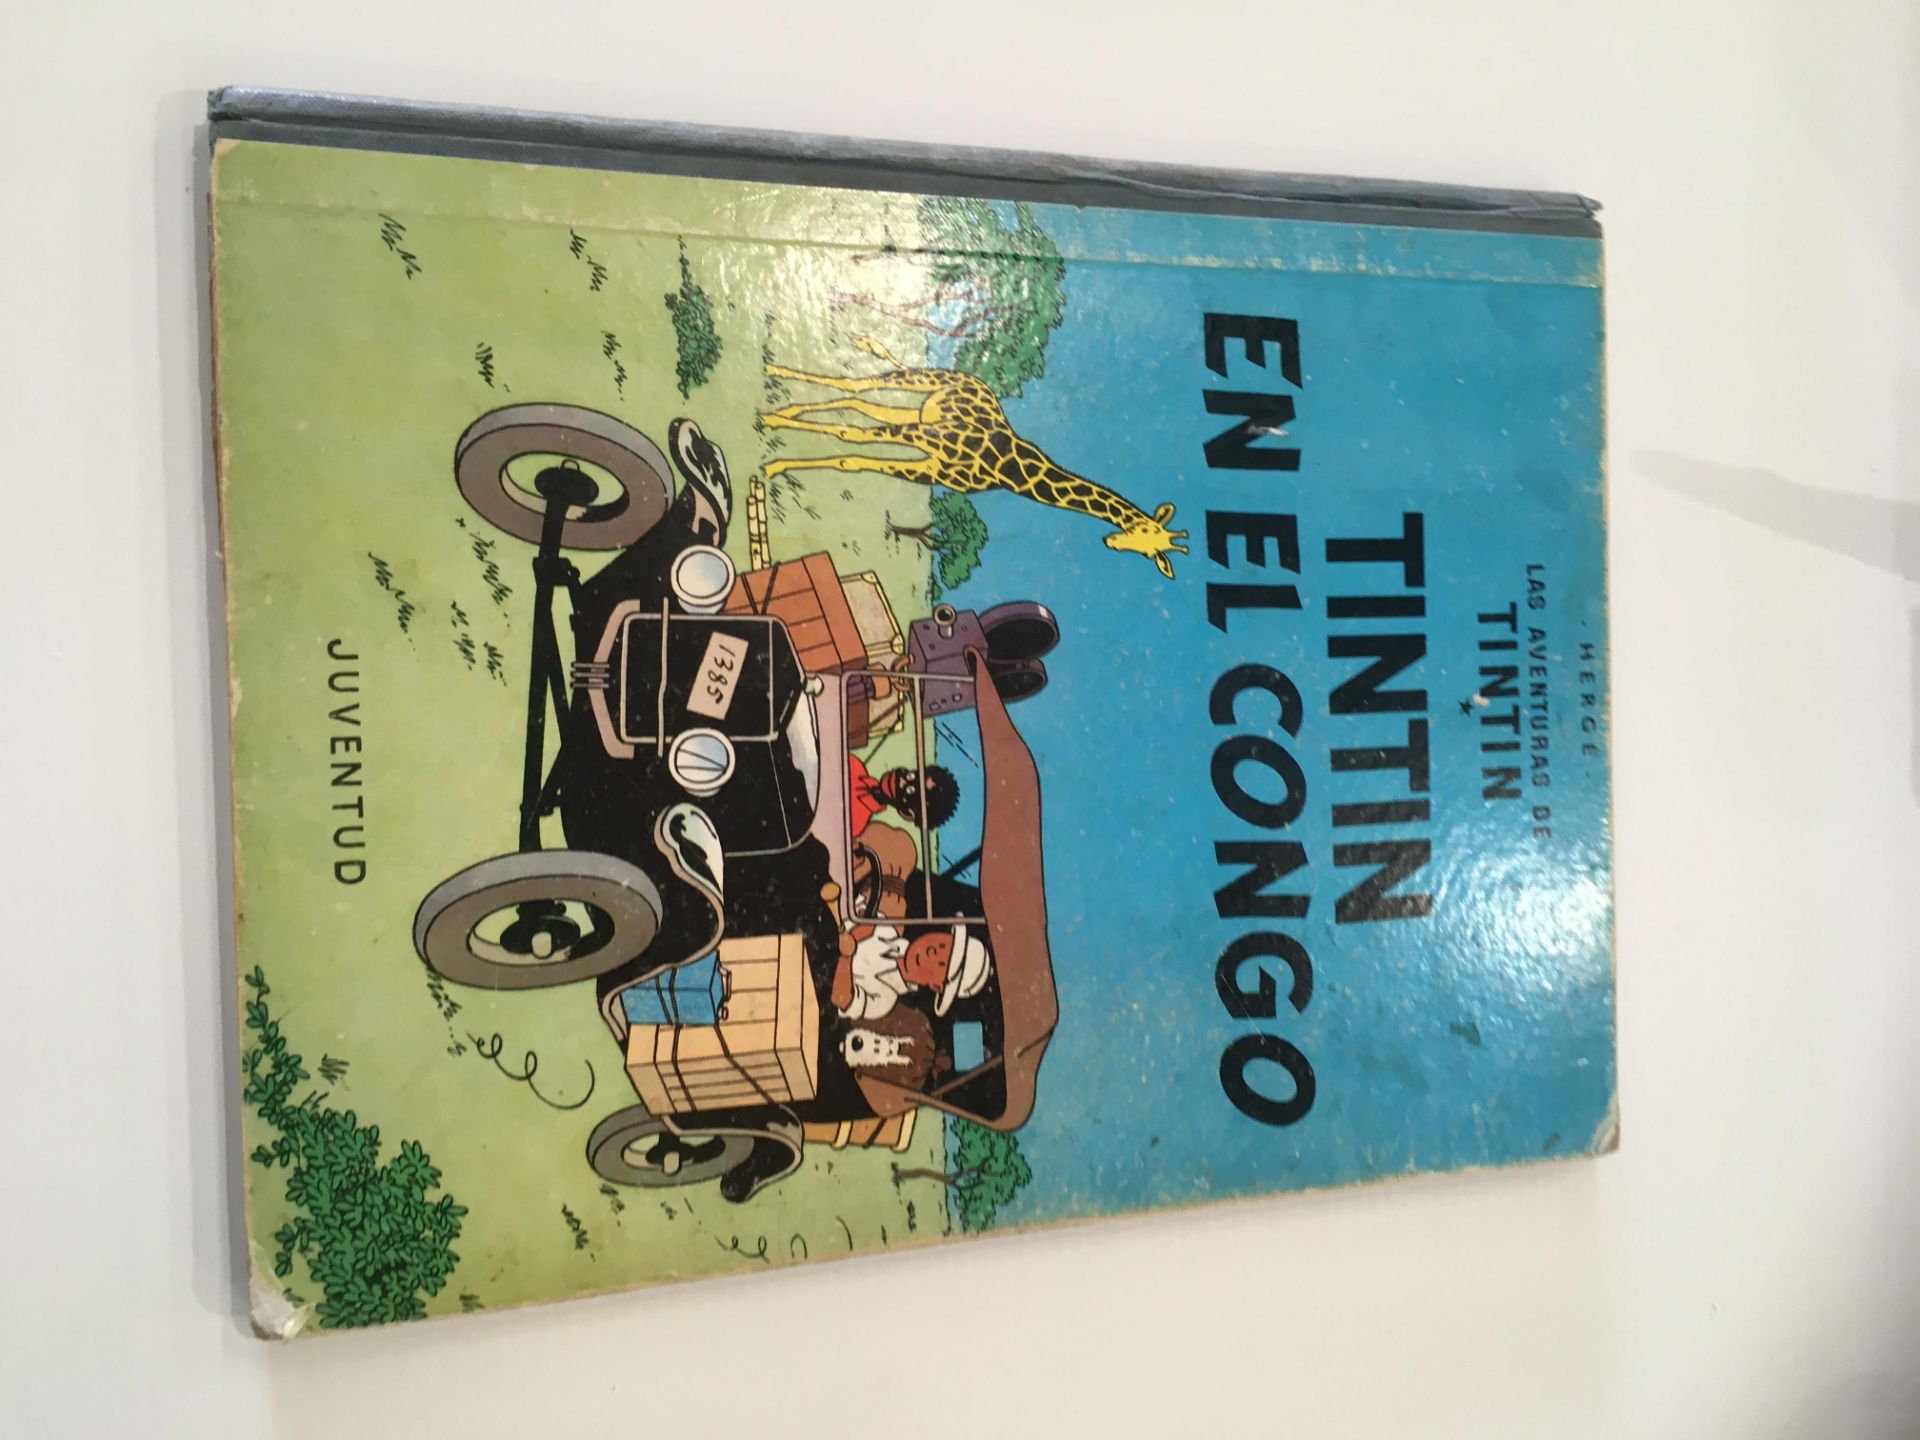 Contents to box 22 childrens books and annuals including a quantity of Herge Adventures of Tin Tin, - Image 6 of 14